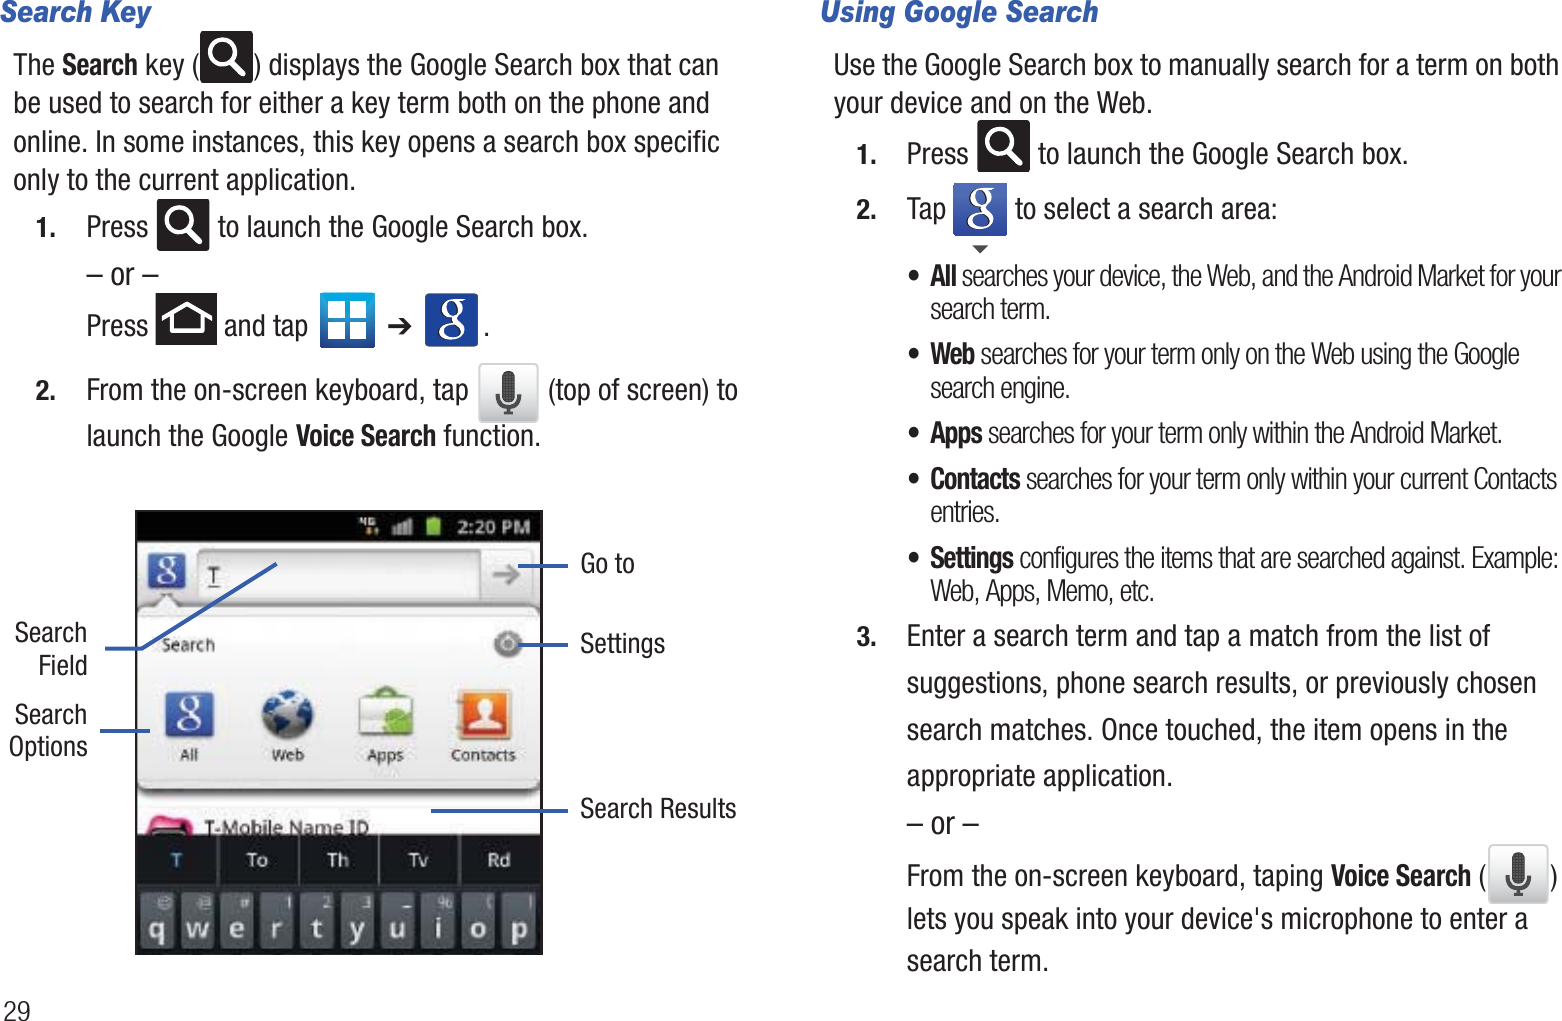 29Search KeyThe Search key ( ) displays the Google Search box that can be used to search for either a key term both on the phone and online. In some instances, this key opens a search box specific only to the current application. 1. Press   to launch the Google Search box.– or –Press   and tap   ➔ . 2. From the on-screen keyboard, tap   (top of screen) to launch the Google Voice Search function.   Using Google SearchUse the Google Search box to manually search for a term on both your device and on the Web.1. Press   to launch the Google Search box.2. Tap   to select a search area:•All searches your device, the Web, and the Android Market for your search term.•Web searches for your term only on the Web using the Google search engine.• Apps searches for your term only within the Android Market.• Contacts searches for your term only within your current Contacts entries.• Settings configures the items that are searched against. Example: Web, Apps, Memo, etc.3. Enter a search term and tap a match from the list of suggestions, phone search results, or previously chosen search matches. Once touched, the item opens in the appropriate application.– or –From the on-screen keyboard, taping Voice Search () lets you speak into your device&apos;s microphone to enter a search term.Go toSearchOptionsSearchFieldSearch ResultsSettings